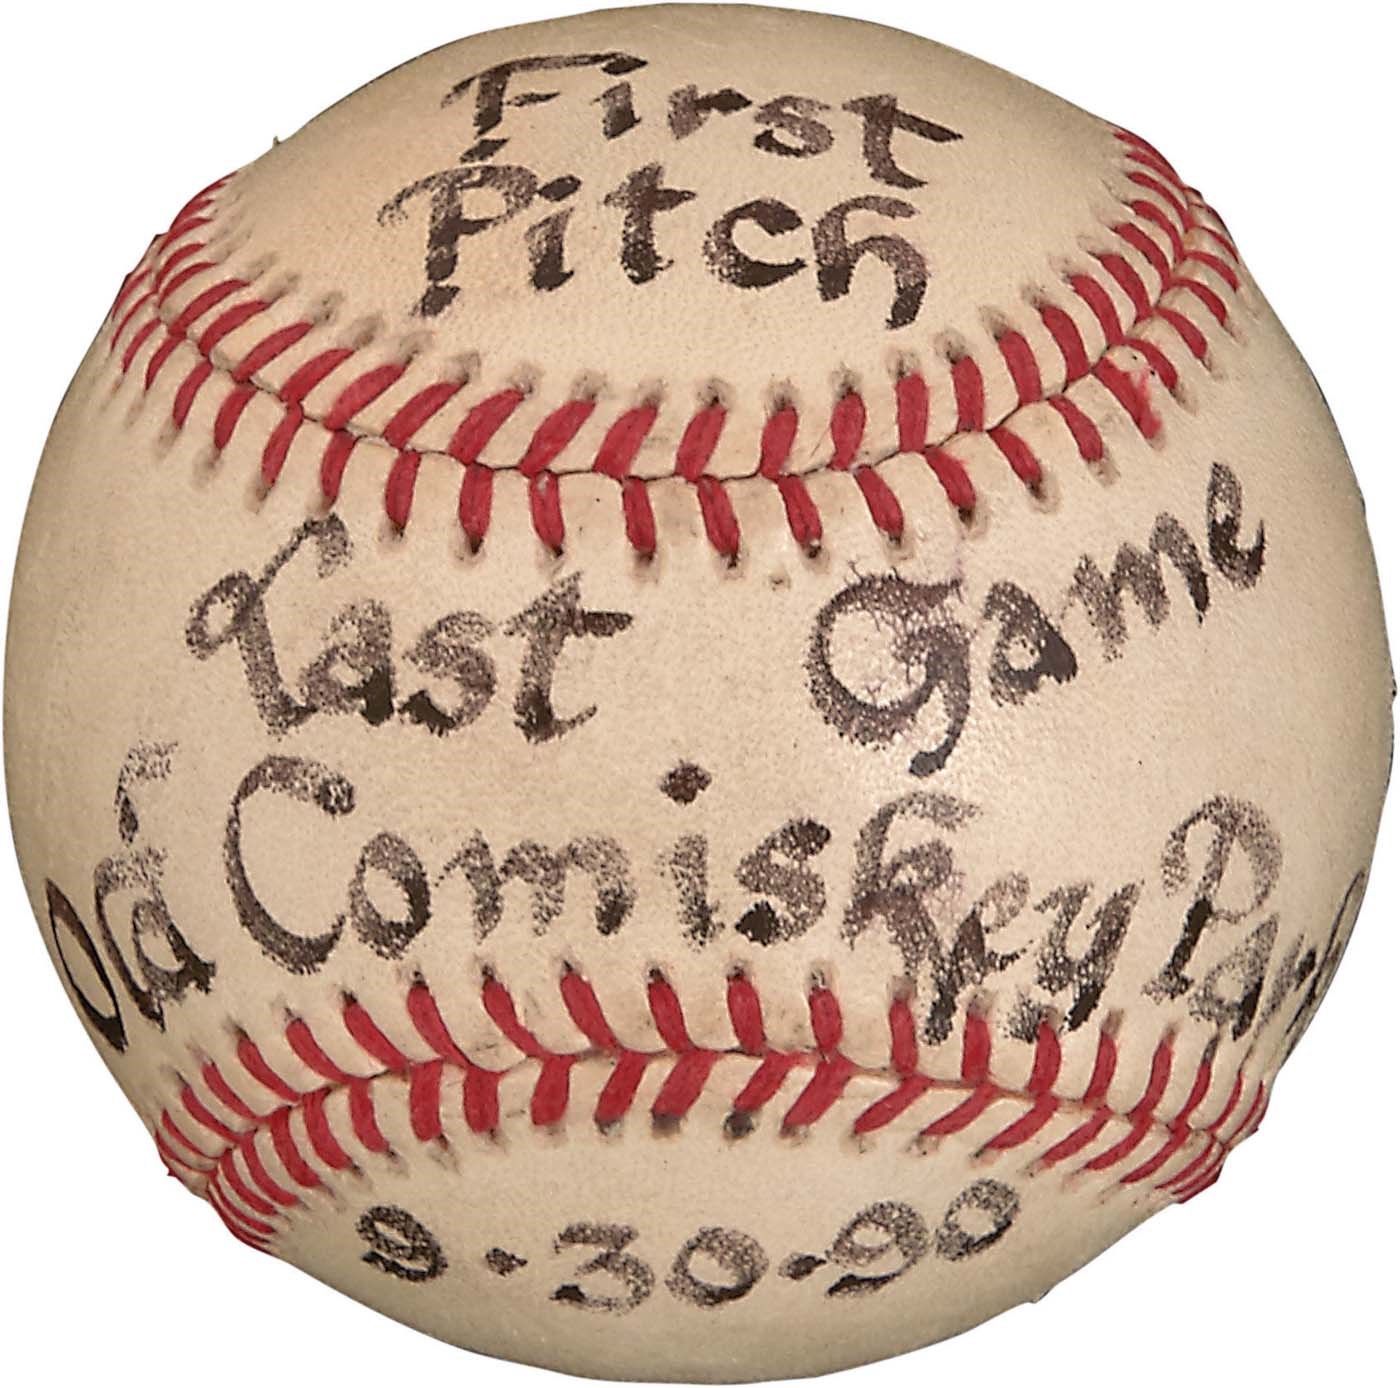 Baseball Memorabilia - First Pitch Ball from the Last Game at Old Comiskey Park (Comiskey Family Sourced)